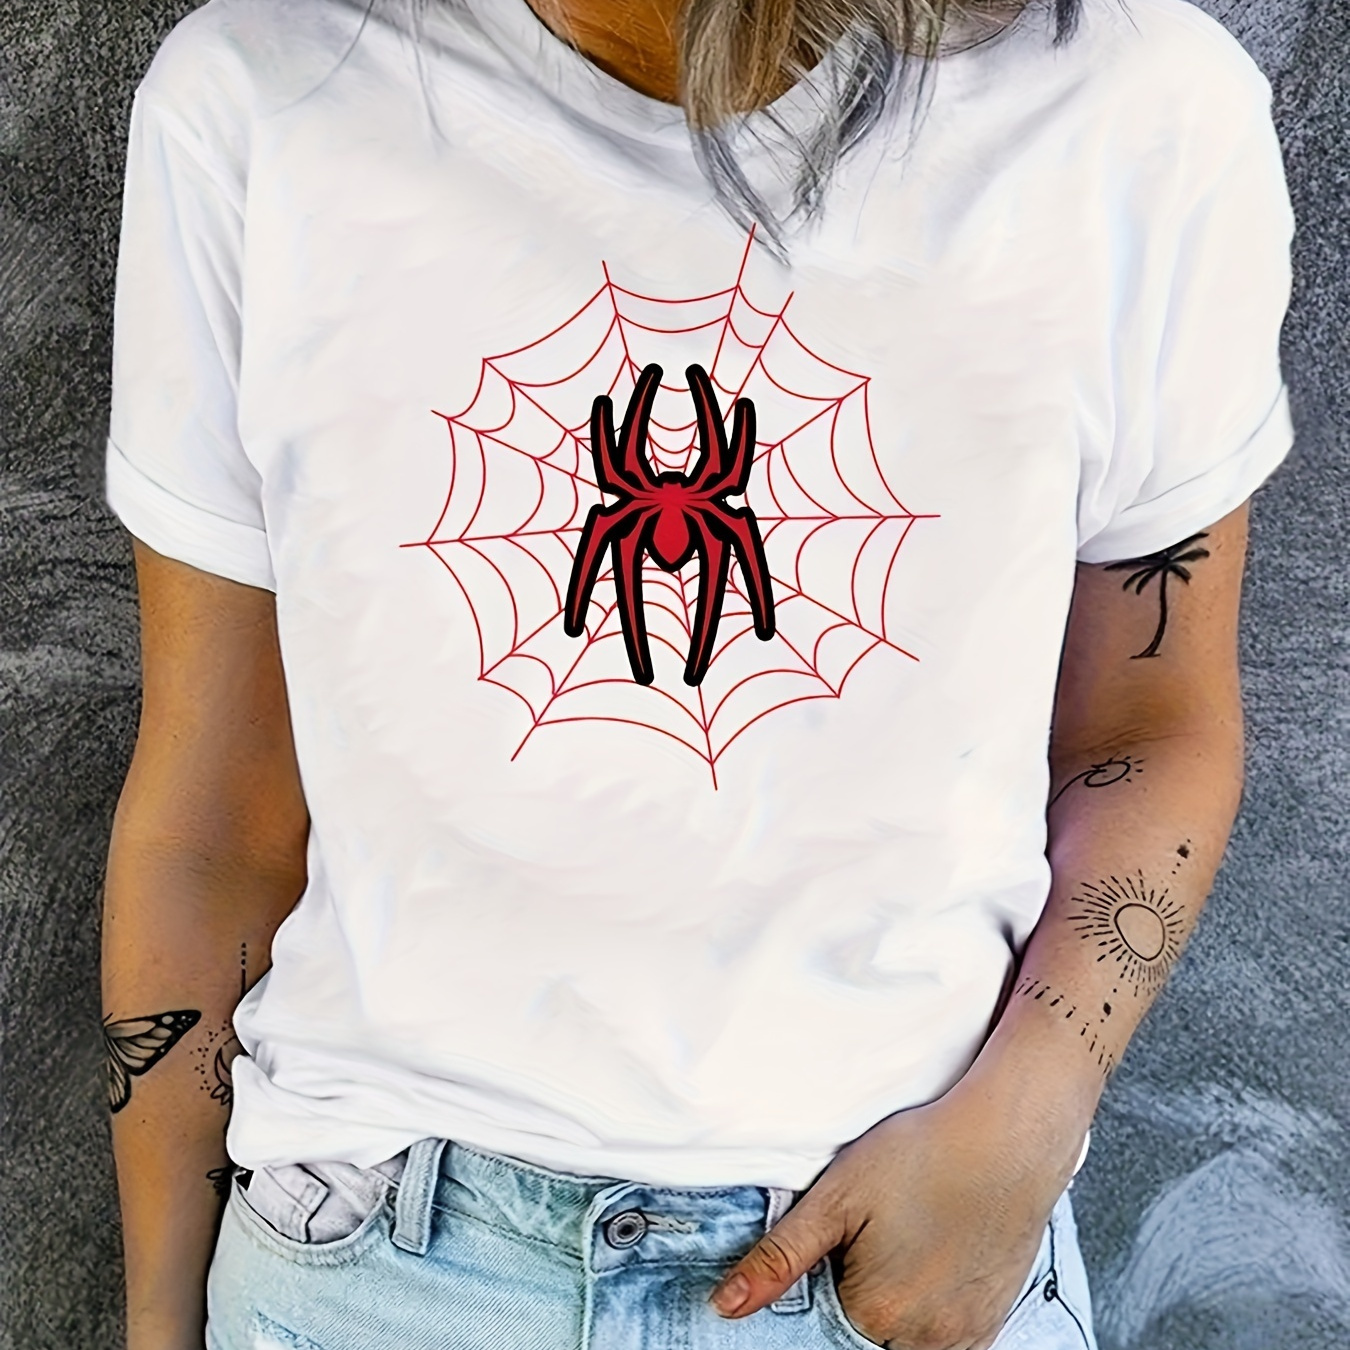 

Spider Print T-shirt, Short Sleeve Crew Neck Casual Top For Summer & Spring, Women's Clothing